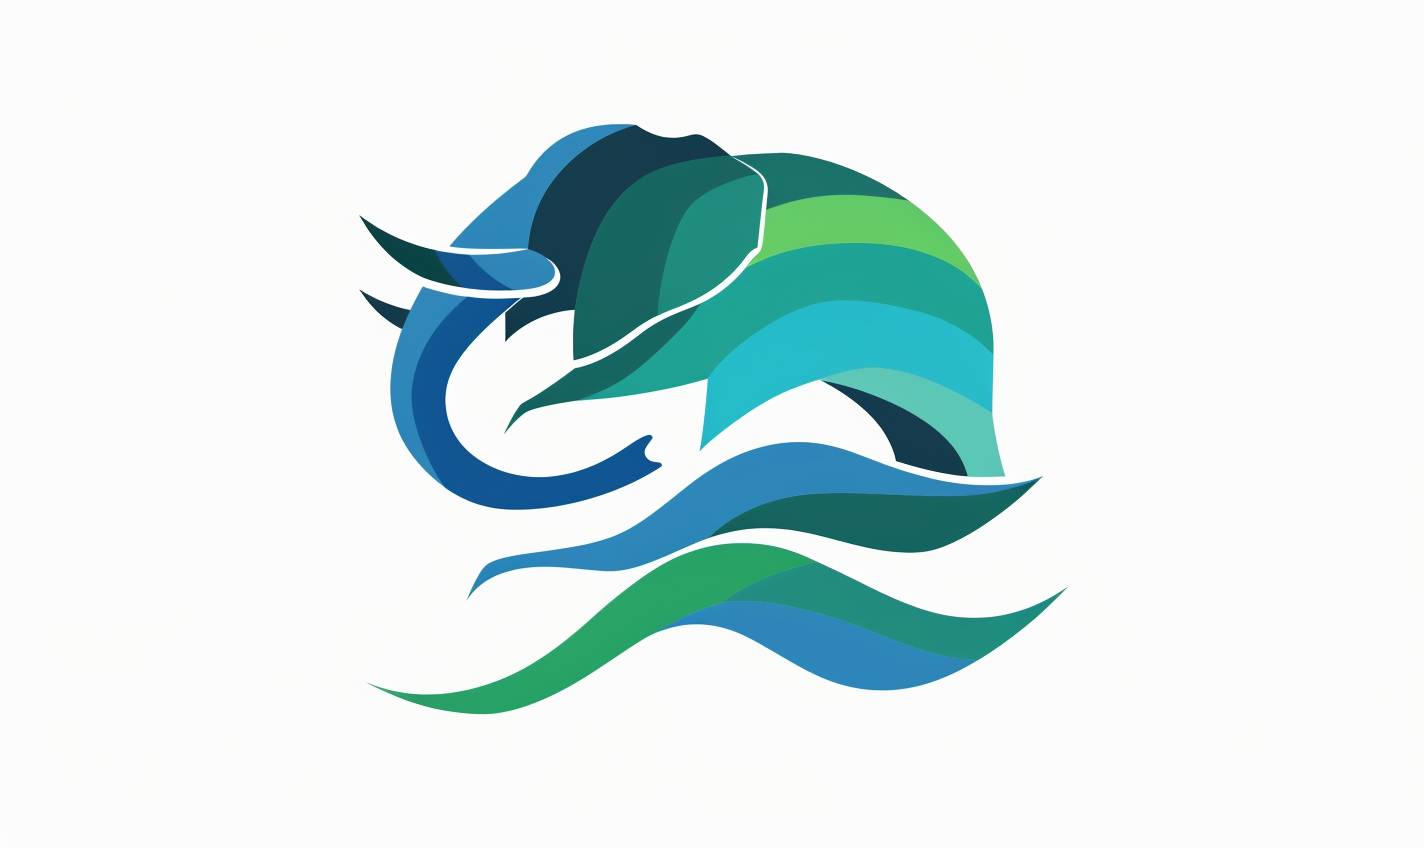 Logo, consisting of abstract shaped style, Blue and green wave elements with an elephant trunk, simple minimal, in the style of Rob Janoff, white background color, vector art design for a web app logo